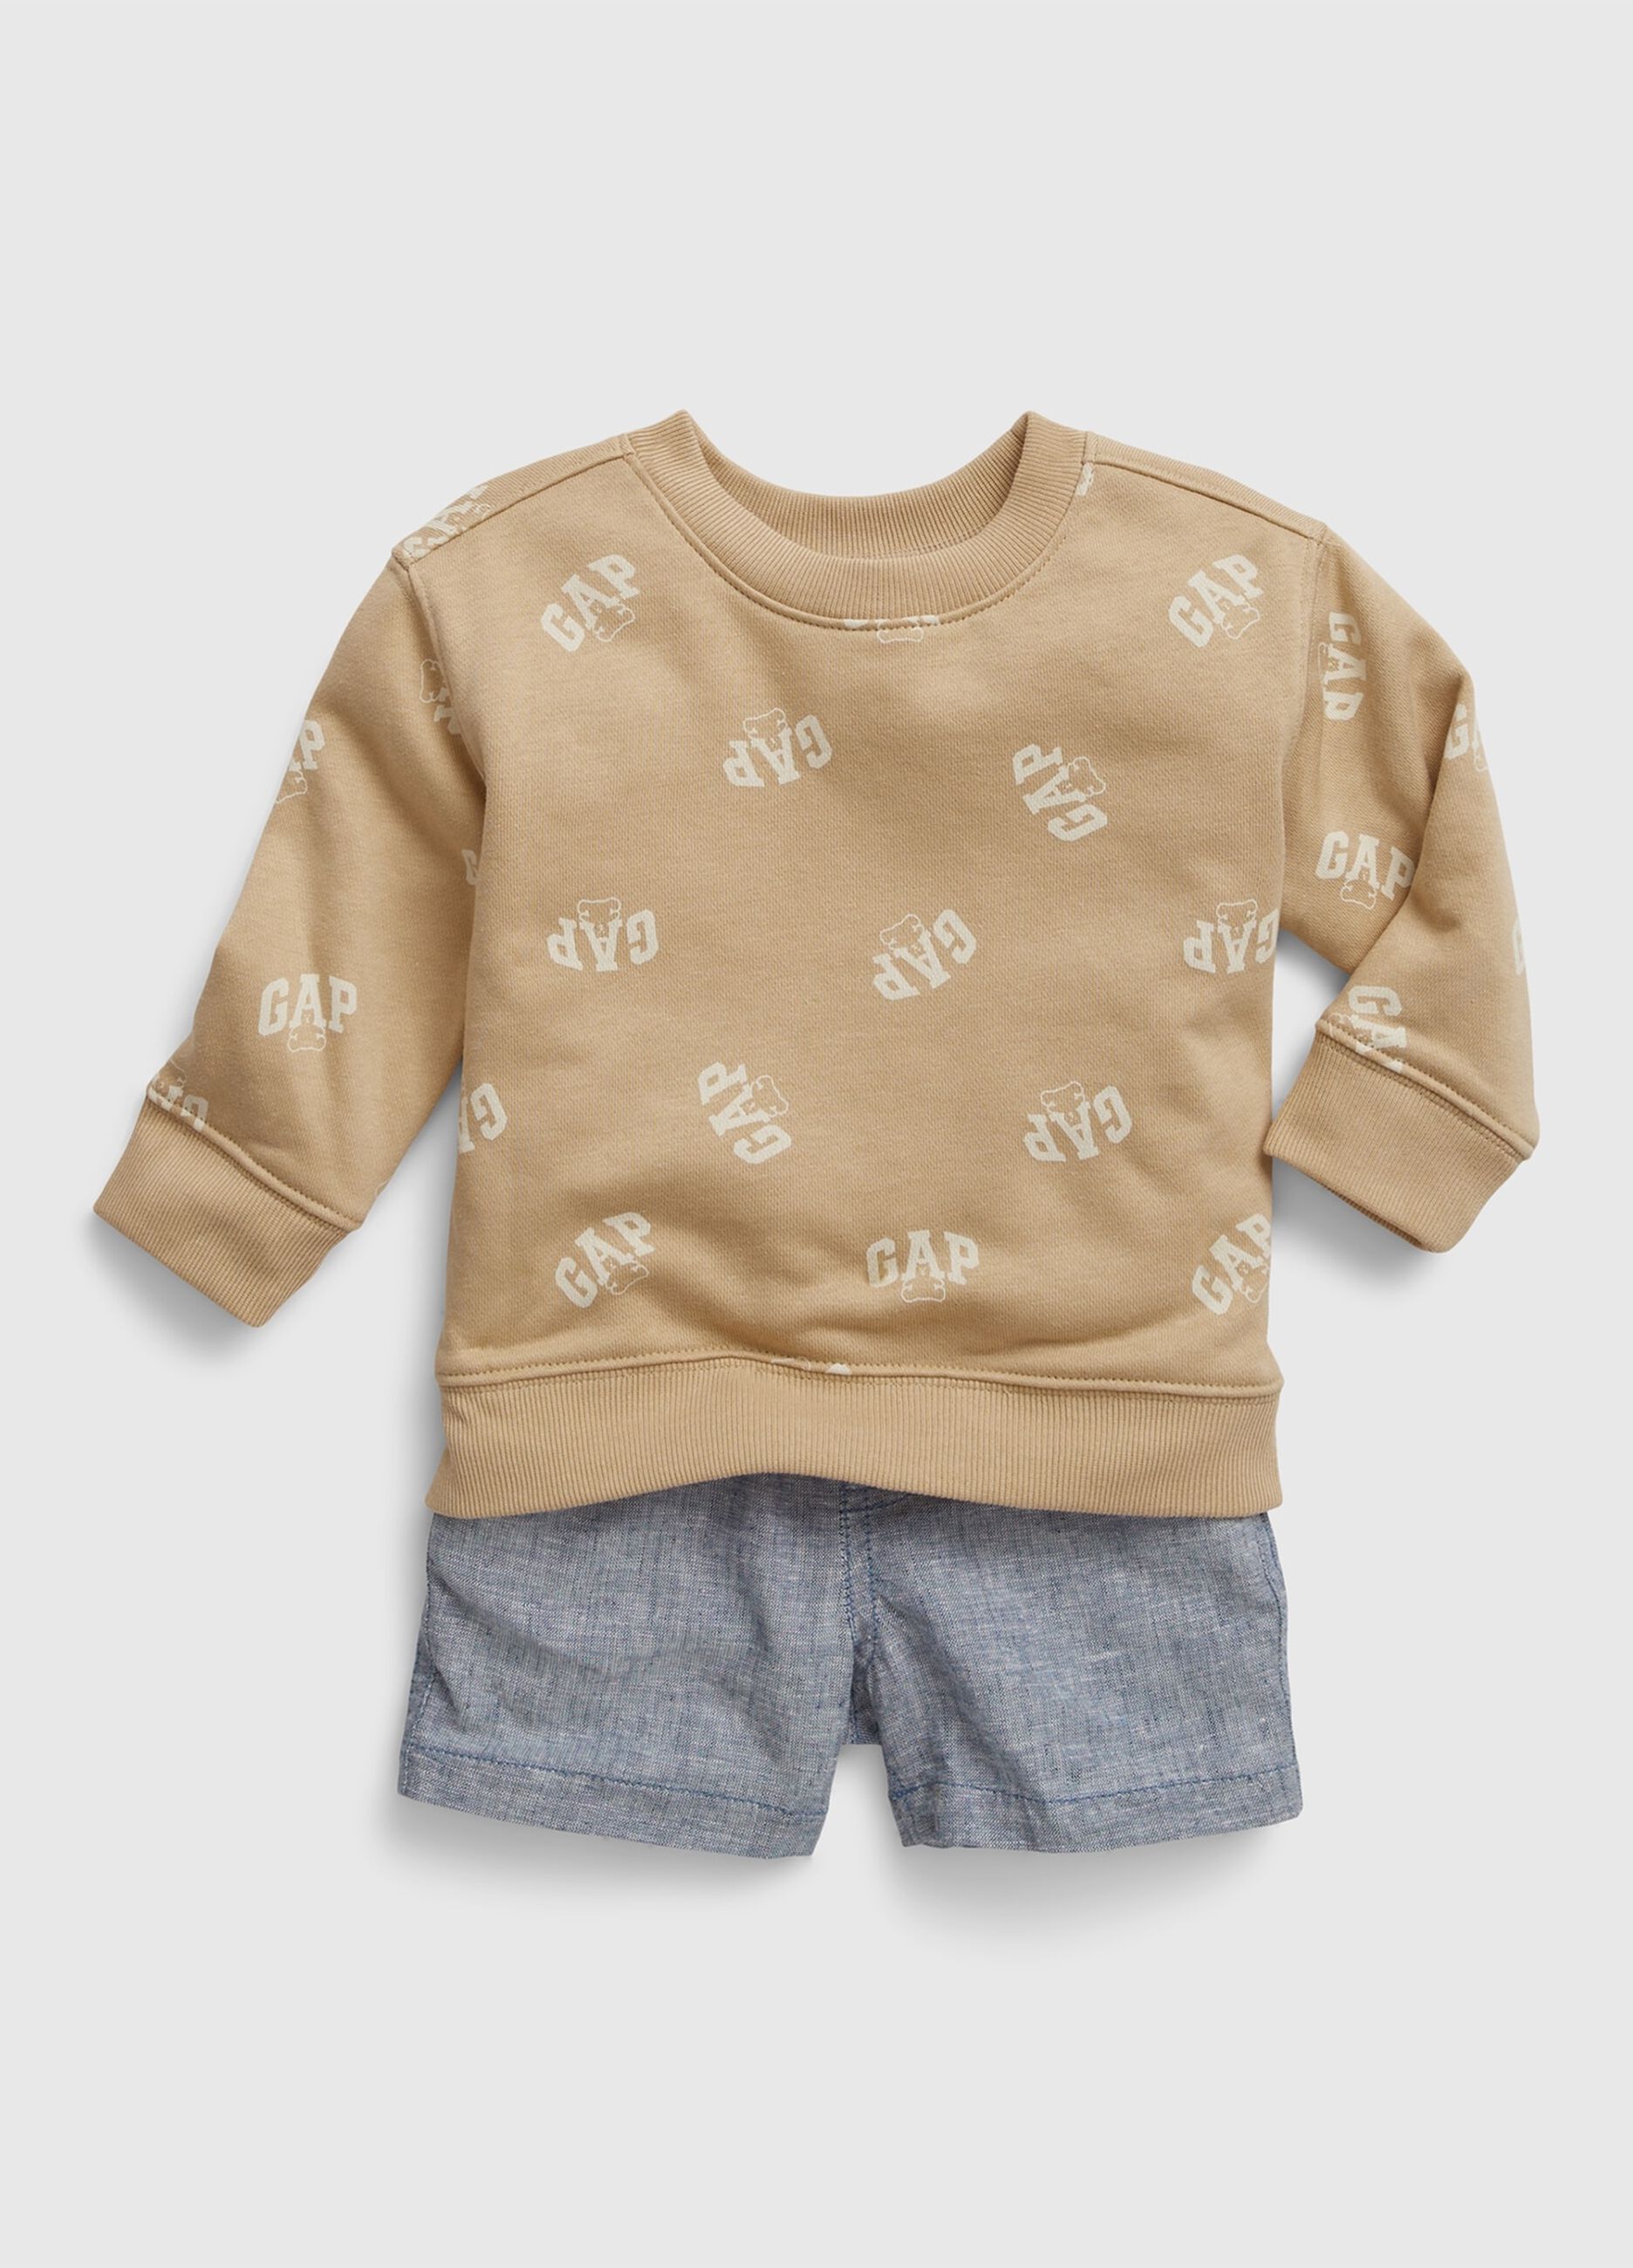 Jogging set with sweatshirt and shorts in cotton_2